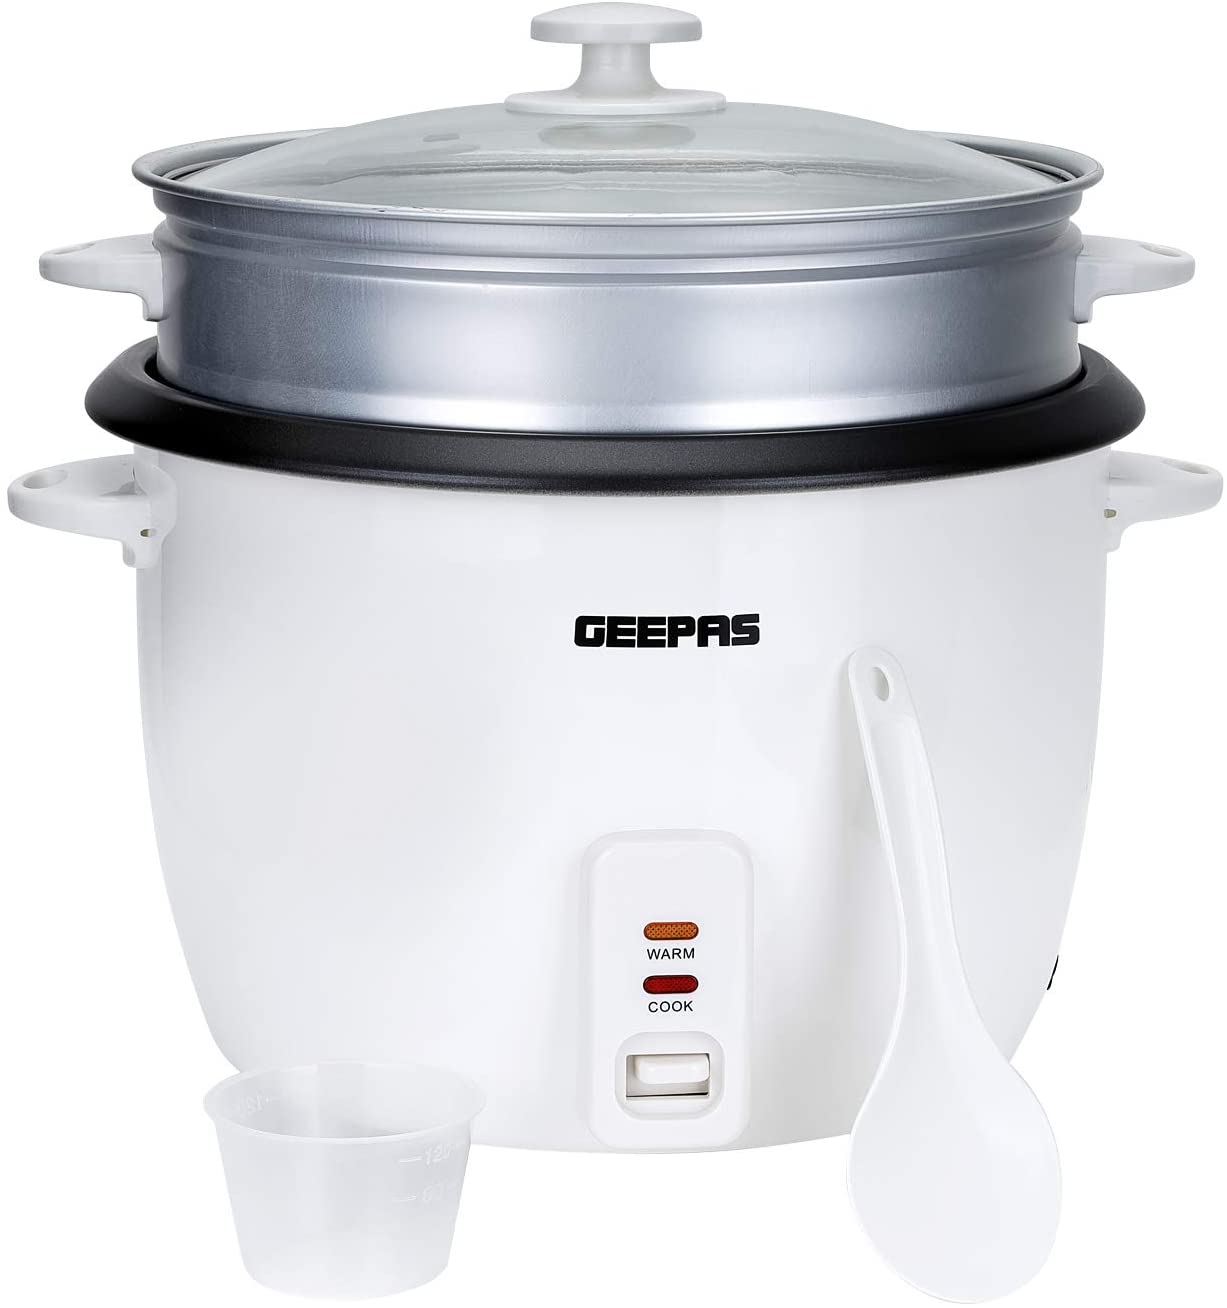 Geepas Automatic 2.2 L Rice Cooker Steamer InnerPot Non Stick Electric Keep Warm